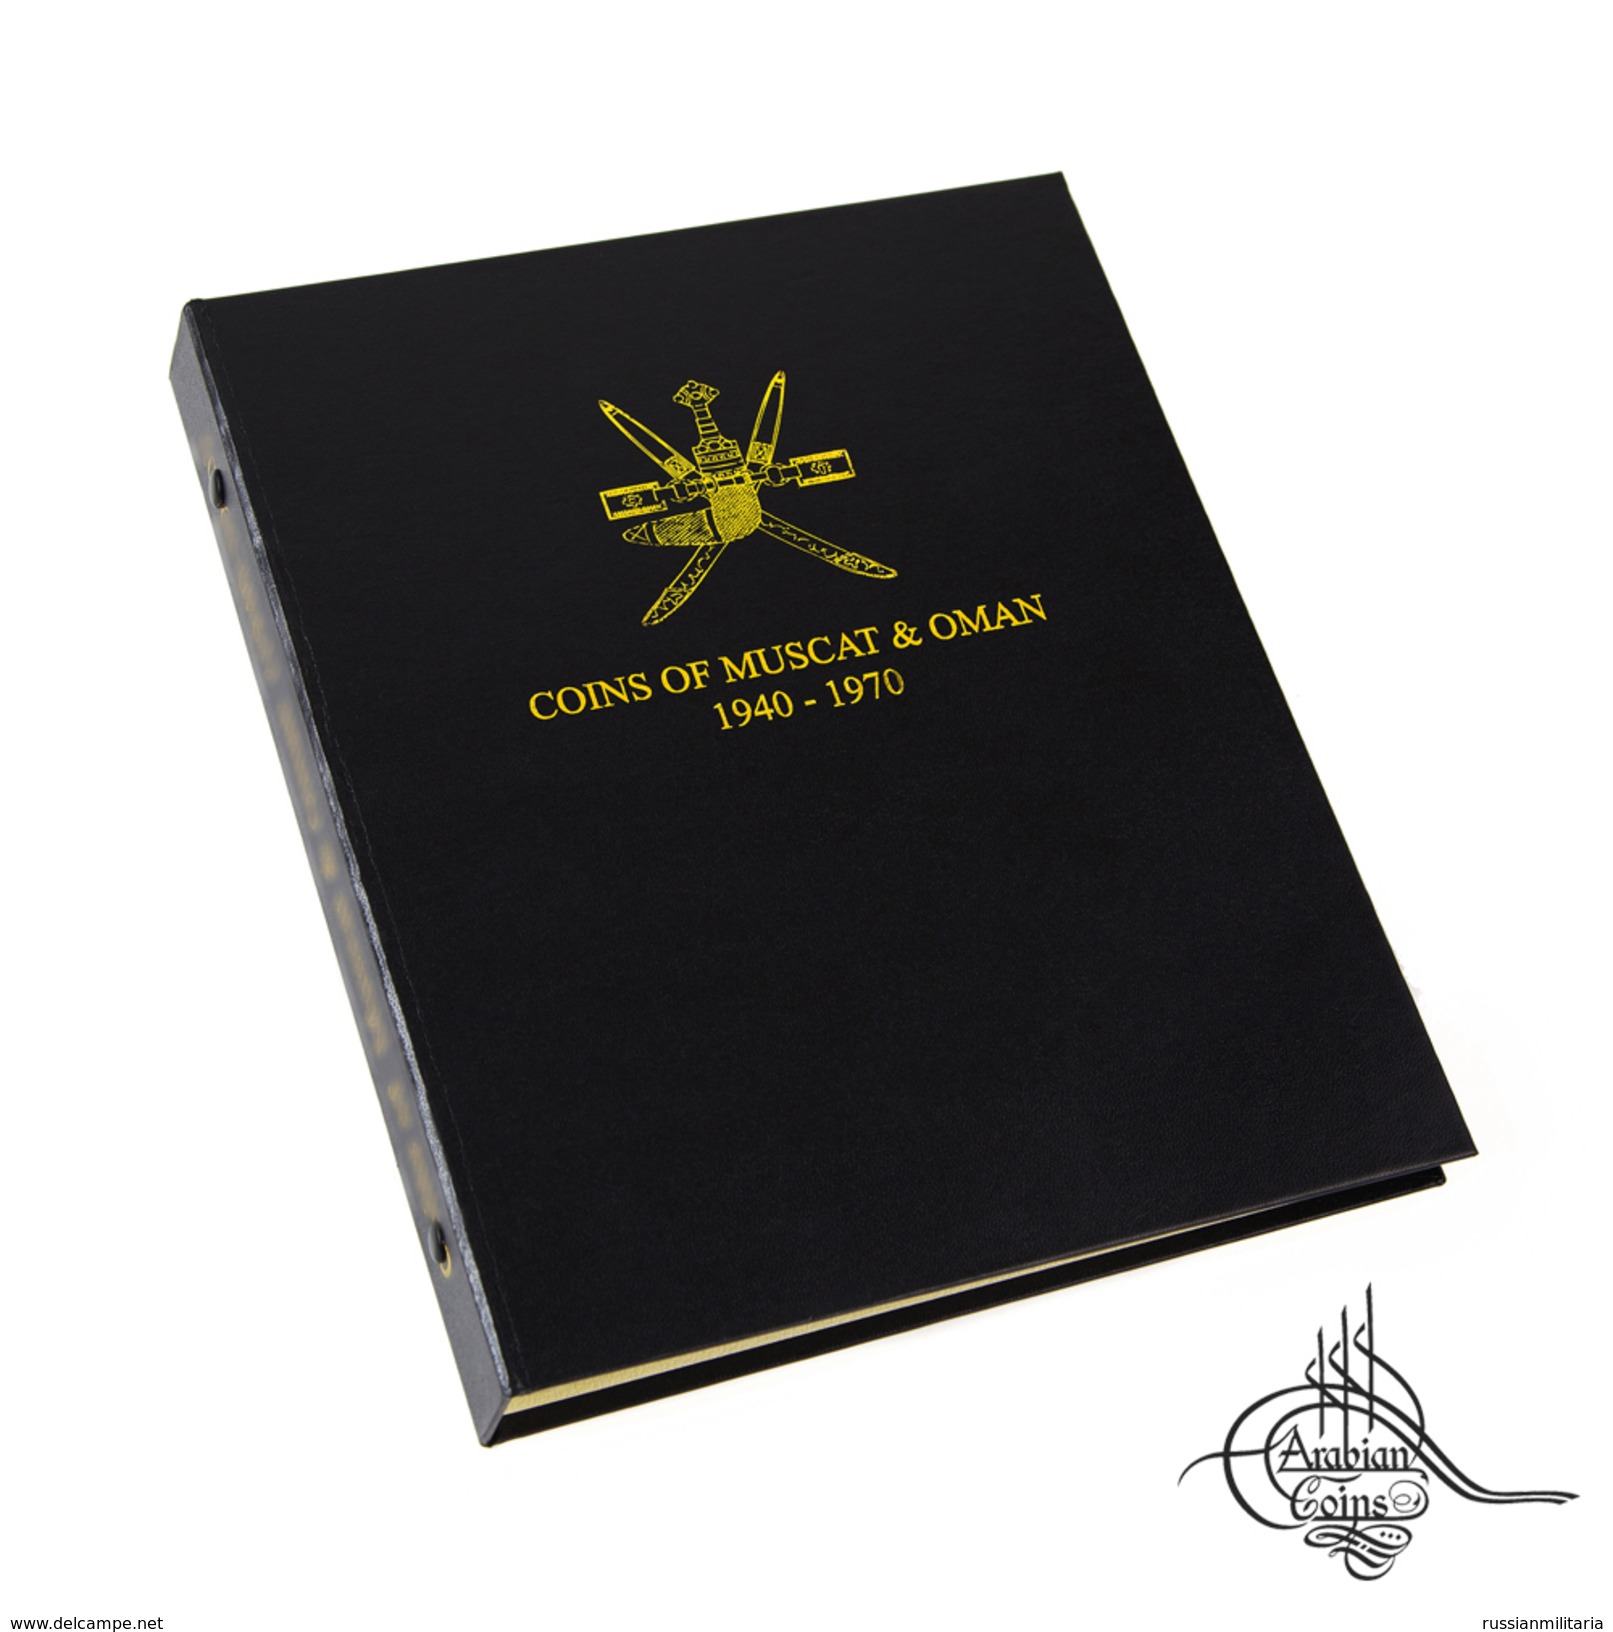 Coin Album For Muscat & Oman Coins 1940-1970 (coins Not Included) - Oman